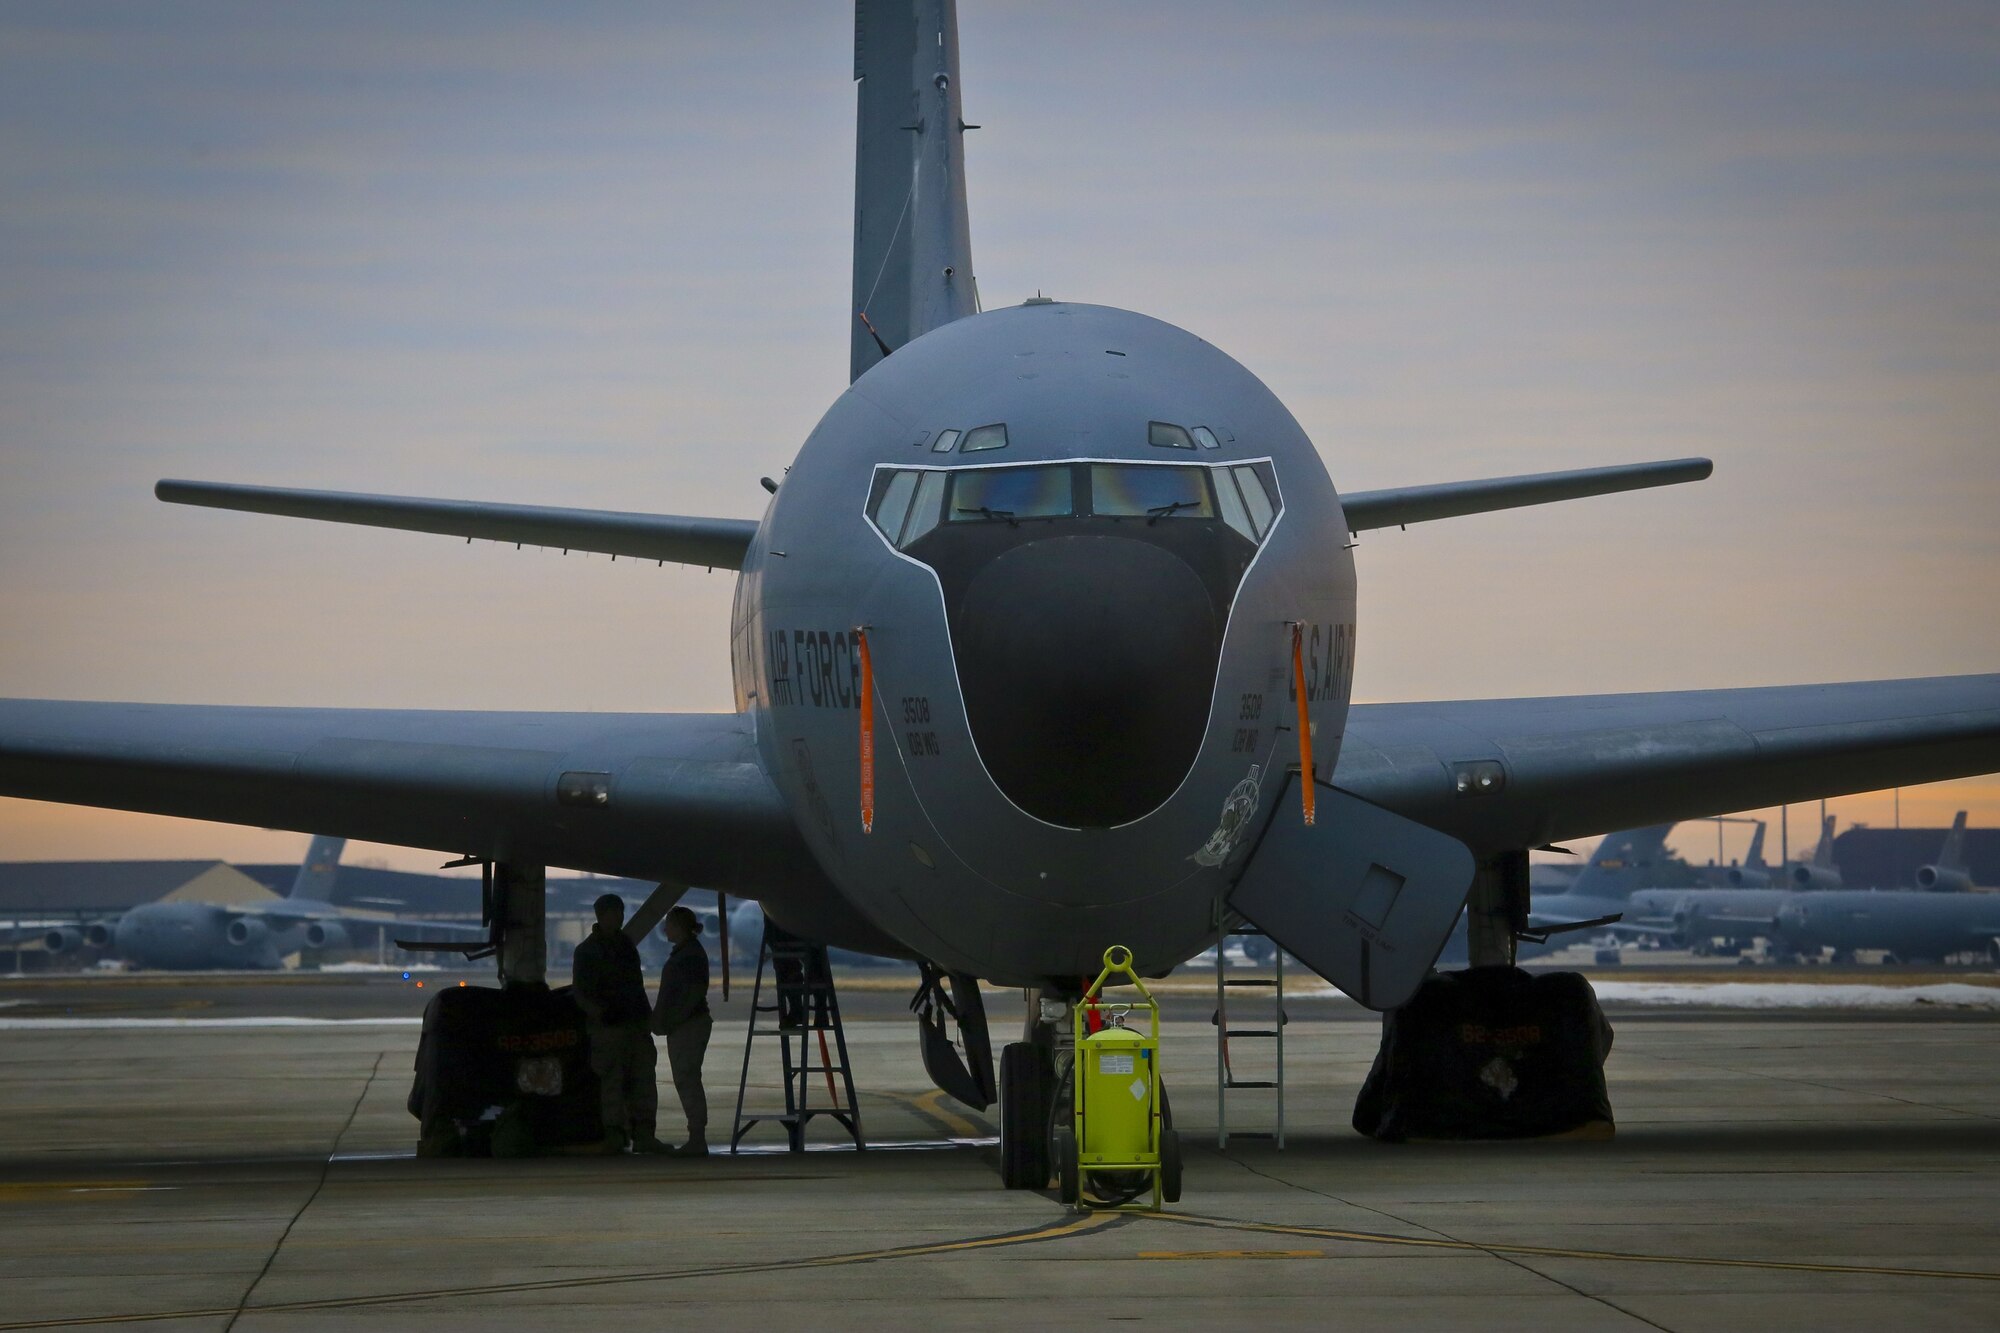 A New Jersey Air National Guard KC-135R from the 108th Wing is worked on by maintenance airmen troubleshooting fuel systems on Joint Base McGuire-Dix-Lakehurst, N.J., Jan. 11, 2018. (U.S. Air National Guard photo by Master Sgt. Matt Hecht)